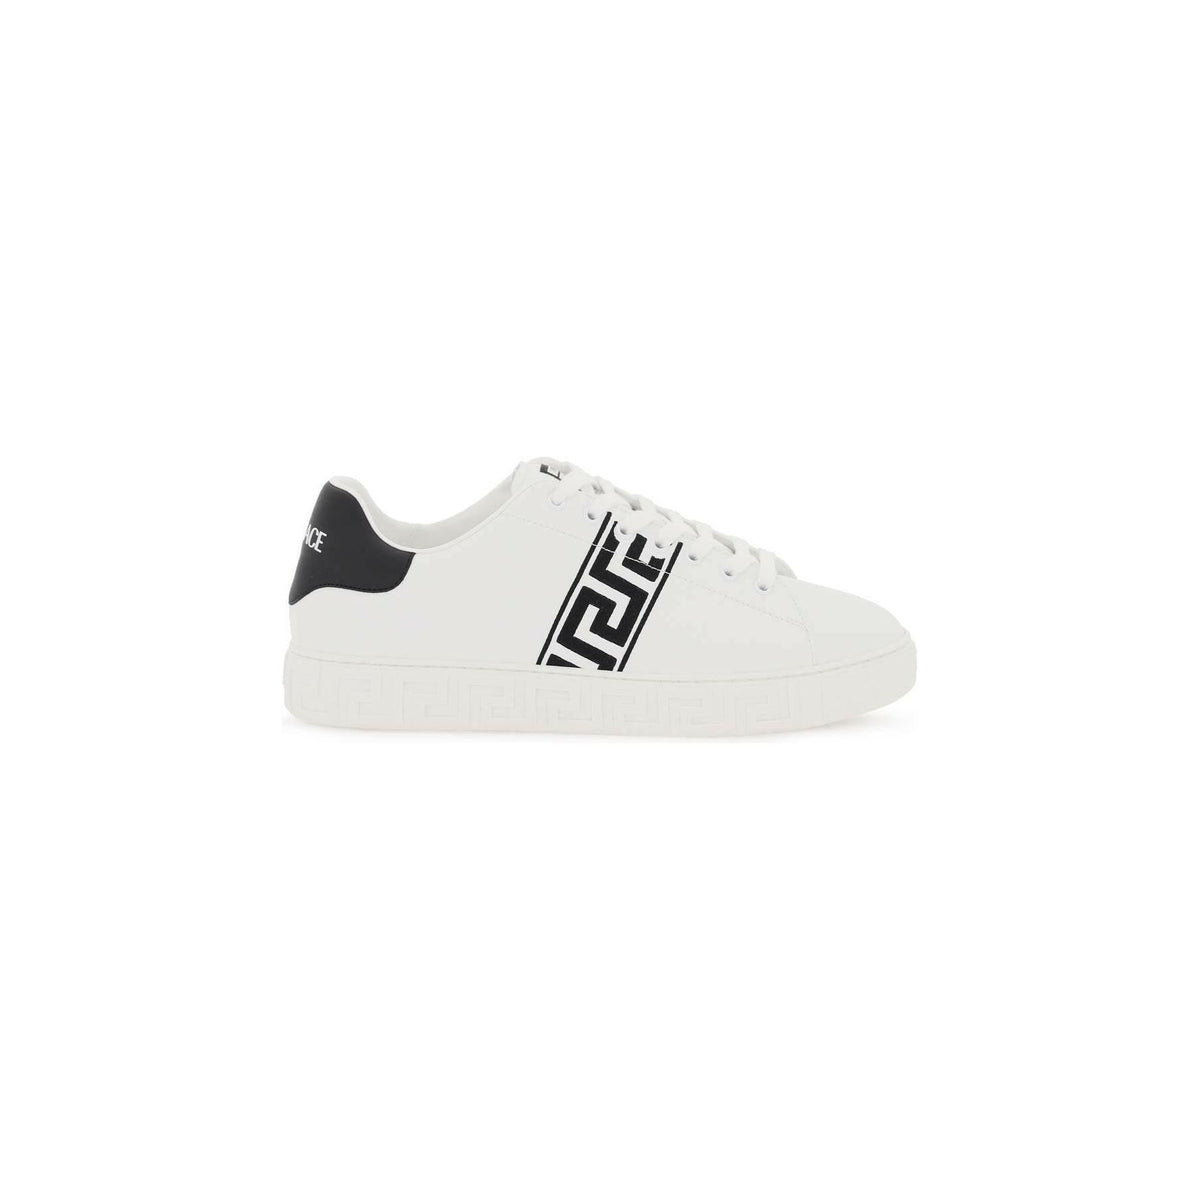 VERSACE - White Black Greca Sneakers With Contrasting Embroidered Motif - JOHN JULIA